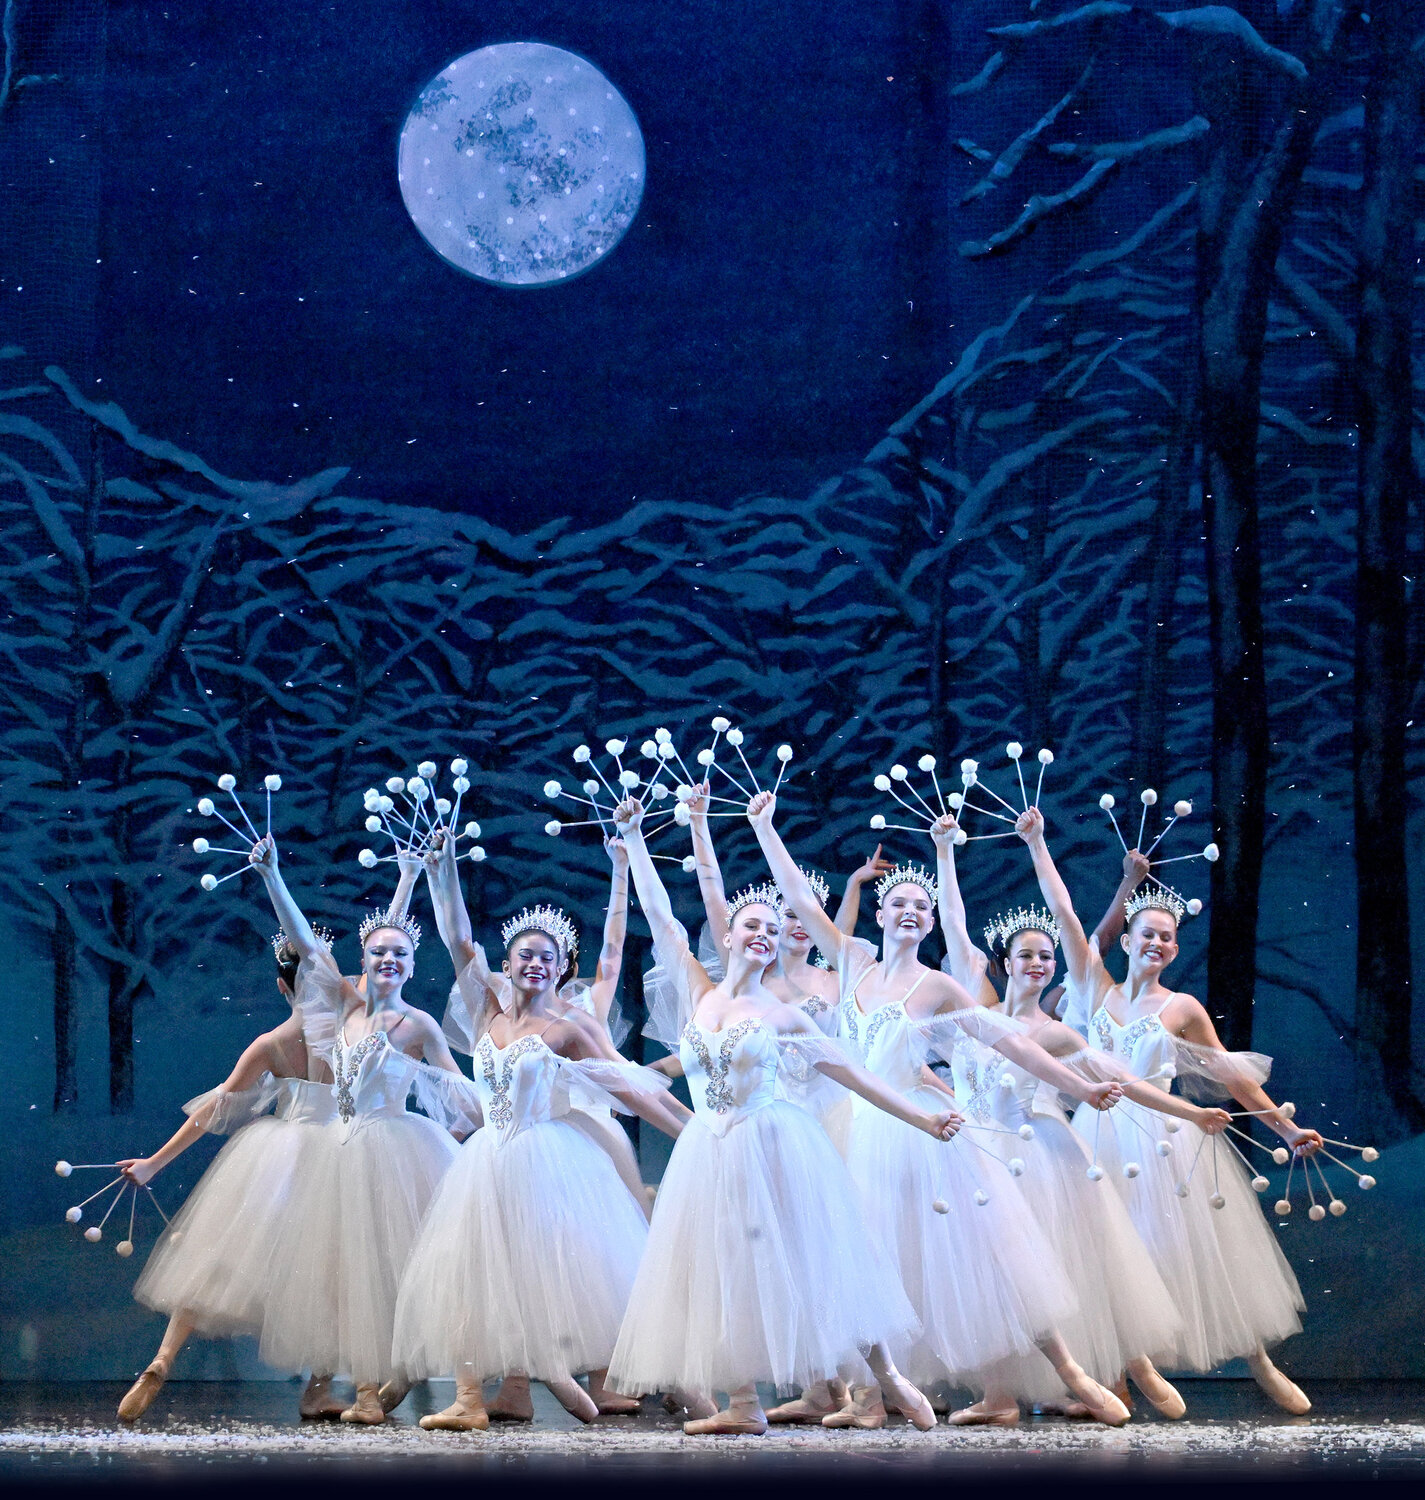 Dancers perform during a previous Nutcracker with the Jacksonville Symphony Orchestra.